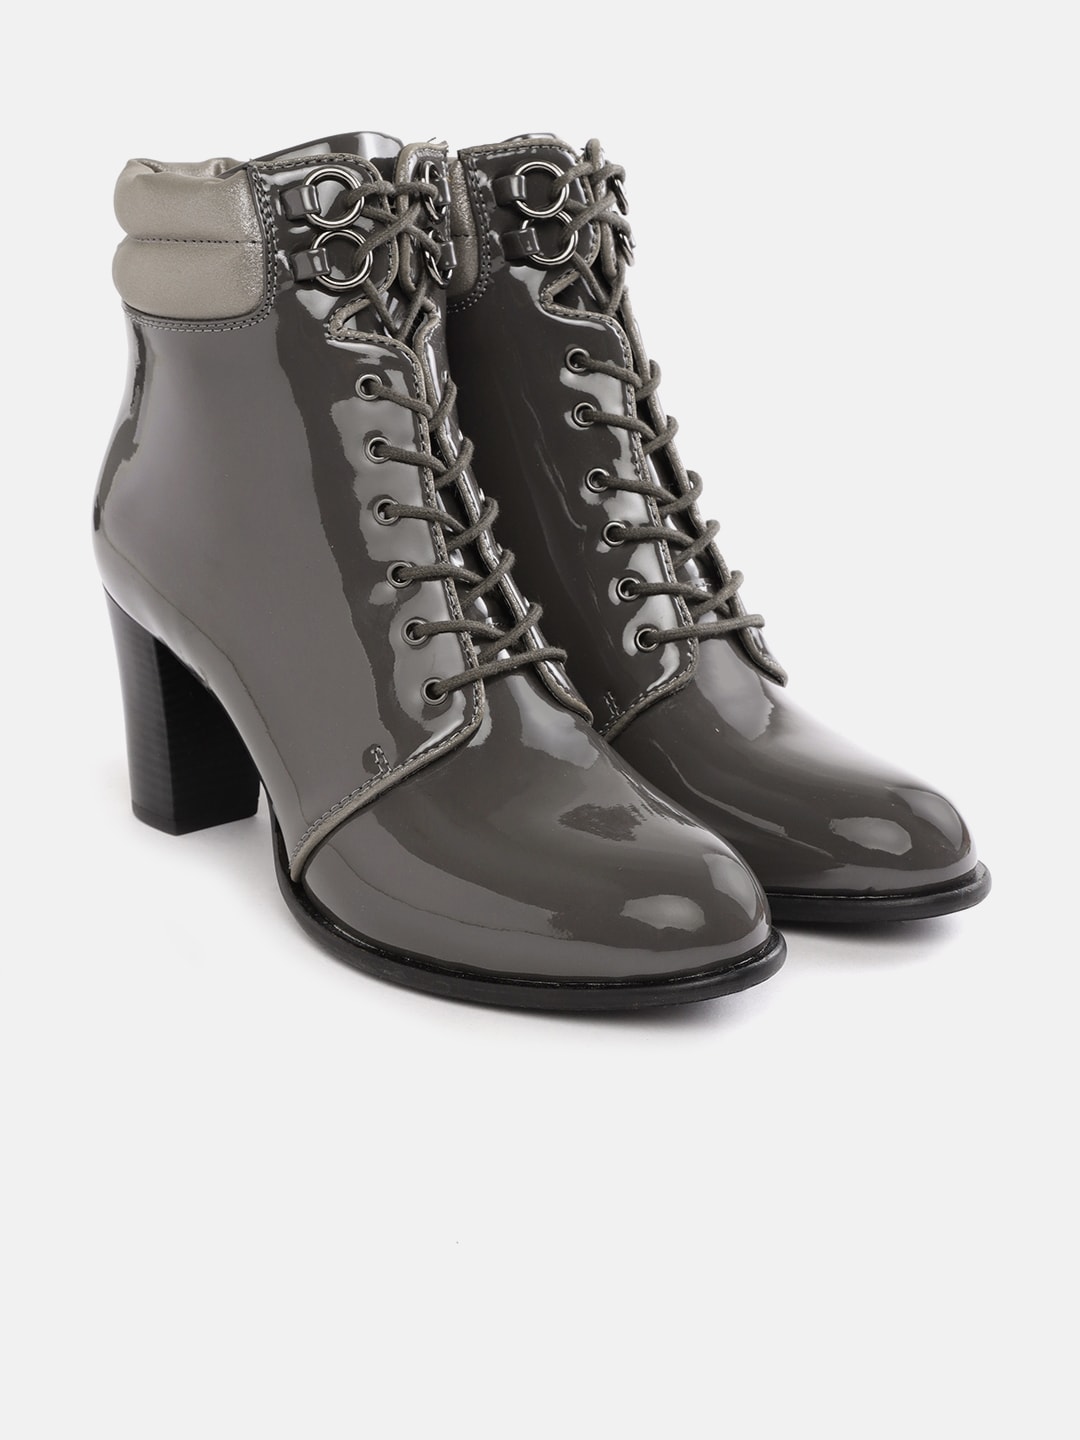 DressBerry Charcoal Grey Glossy Finish Block Mid-Top Heeled Boots with Quilted Detail Price in India